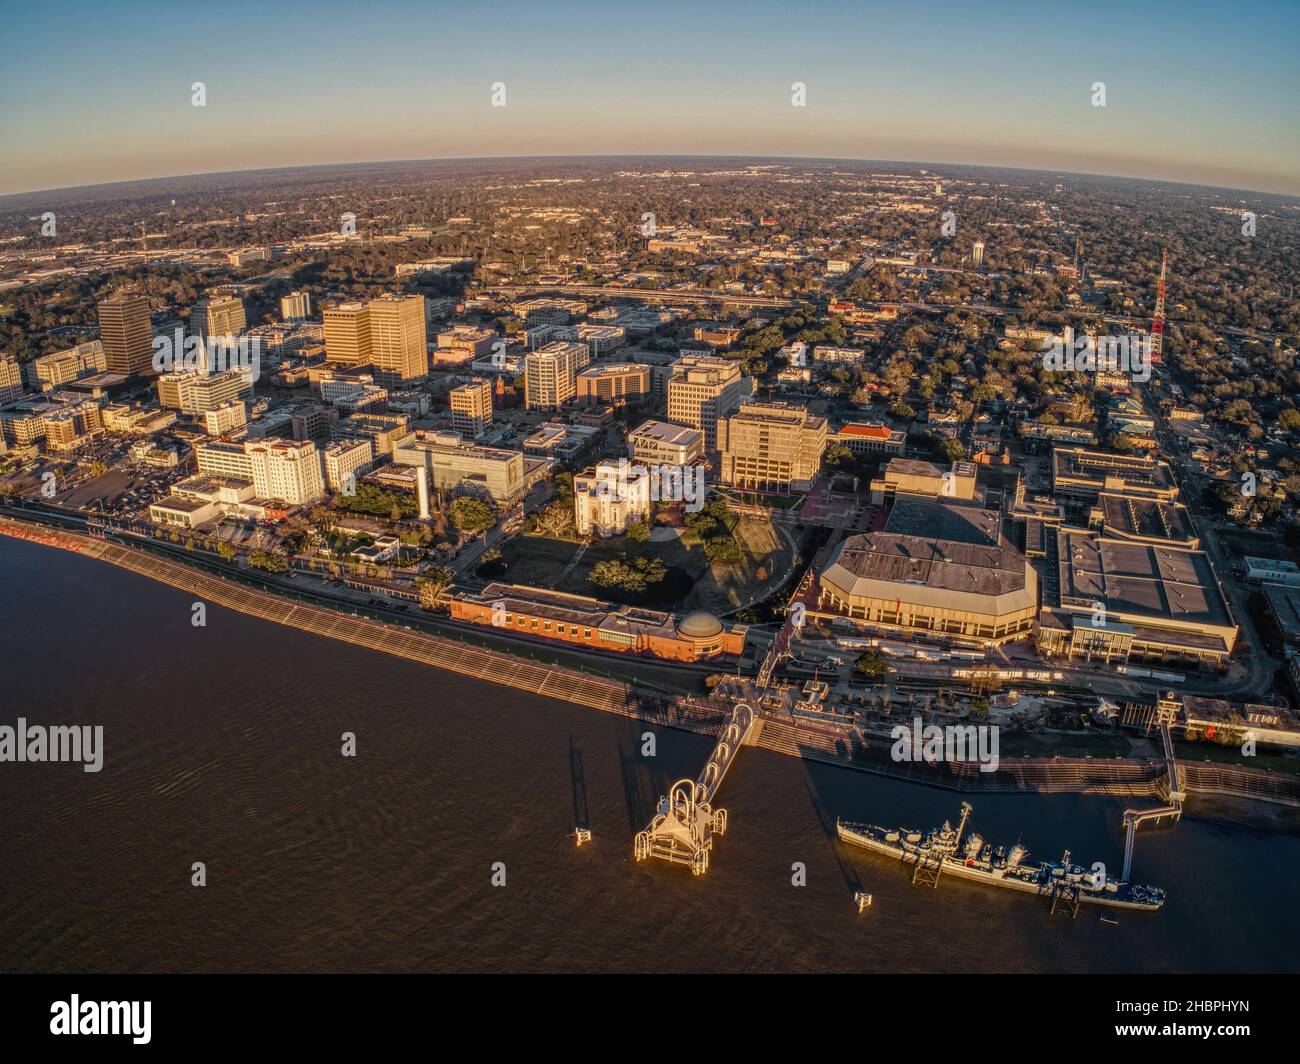 An aerial view of Baton Rouge, the Capitol of the American State of Louisiana at sunset Stock Photo